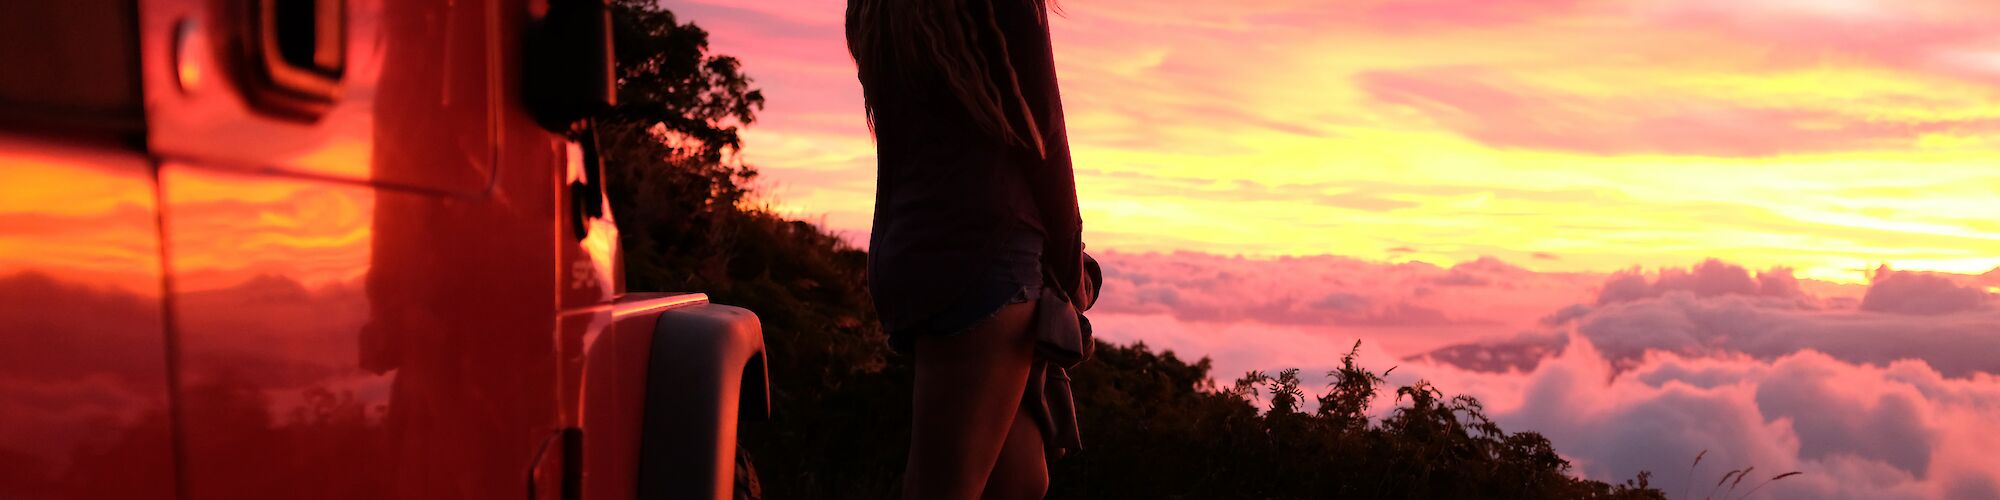 A person is standing near a vehicle, gazing at a vibrant sunset above the clouds, with a breathtaking view in the background.